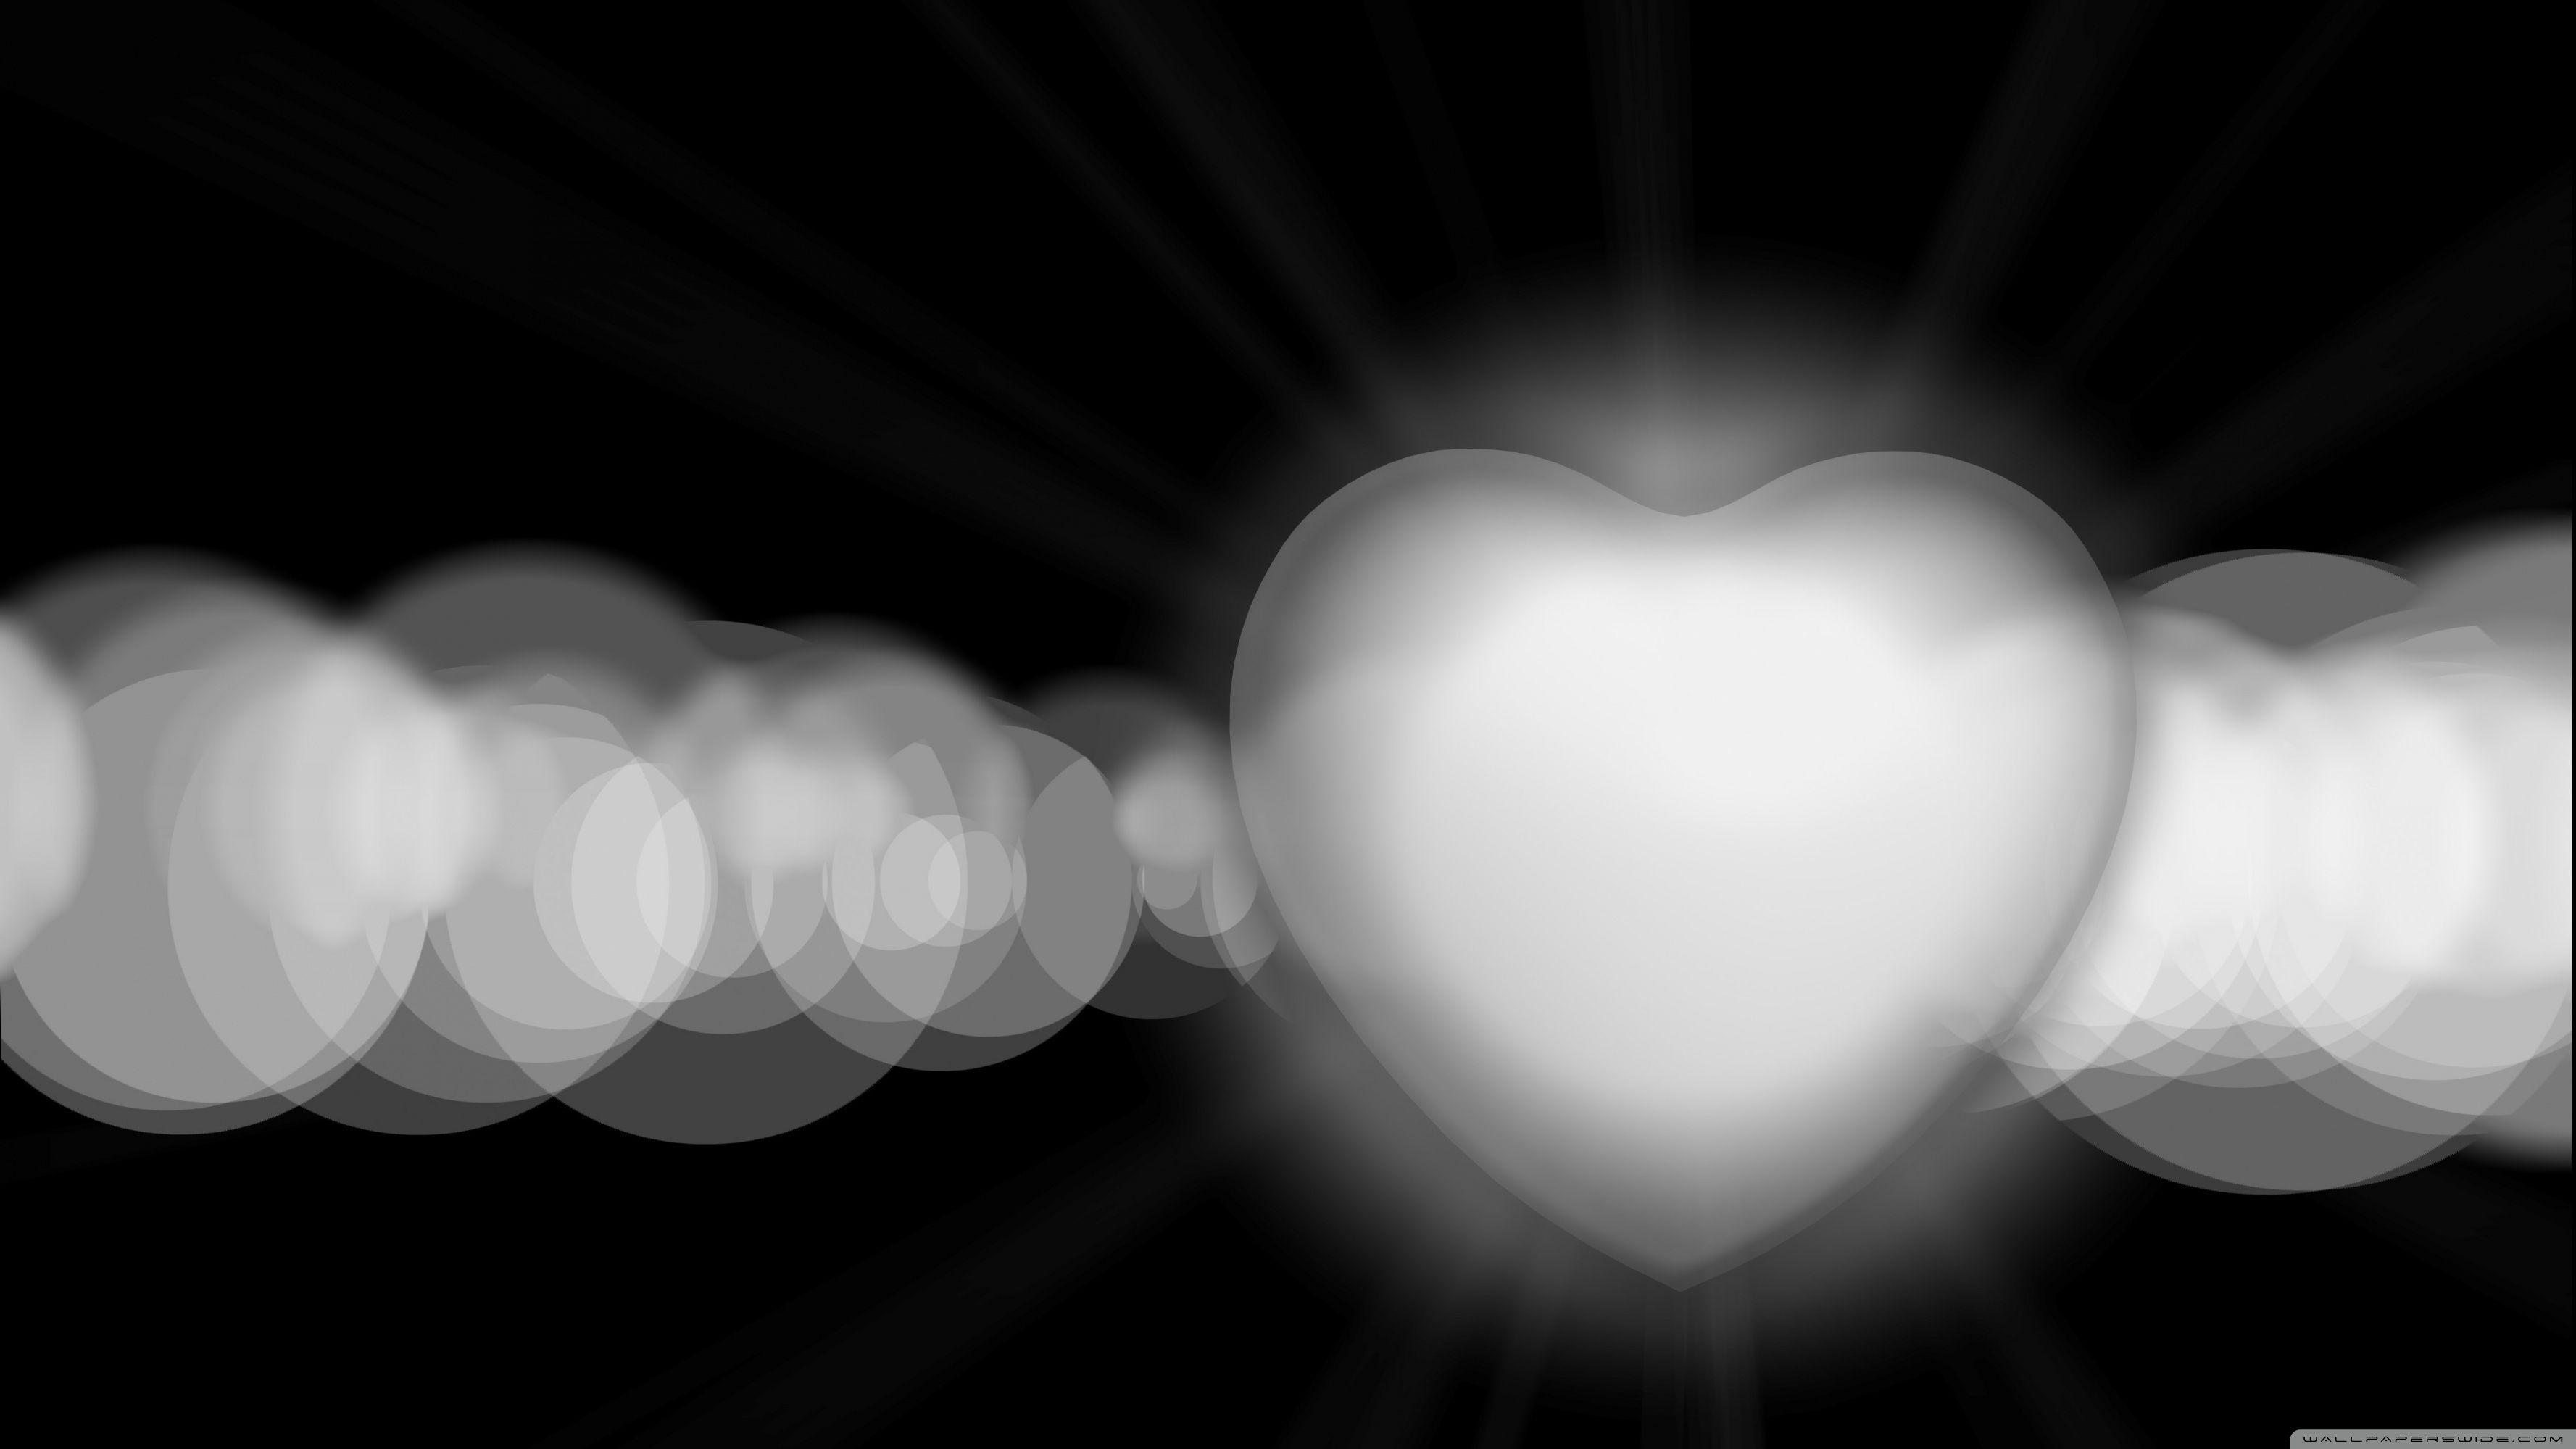 Black and White Heart Wallpapers - Top Free Black and White Heart